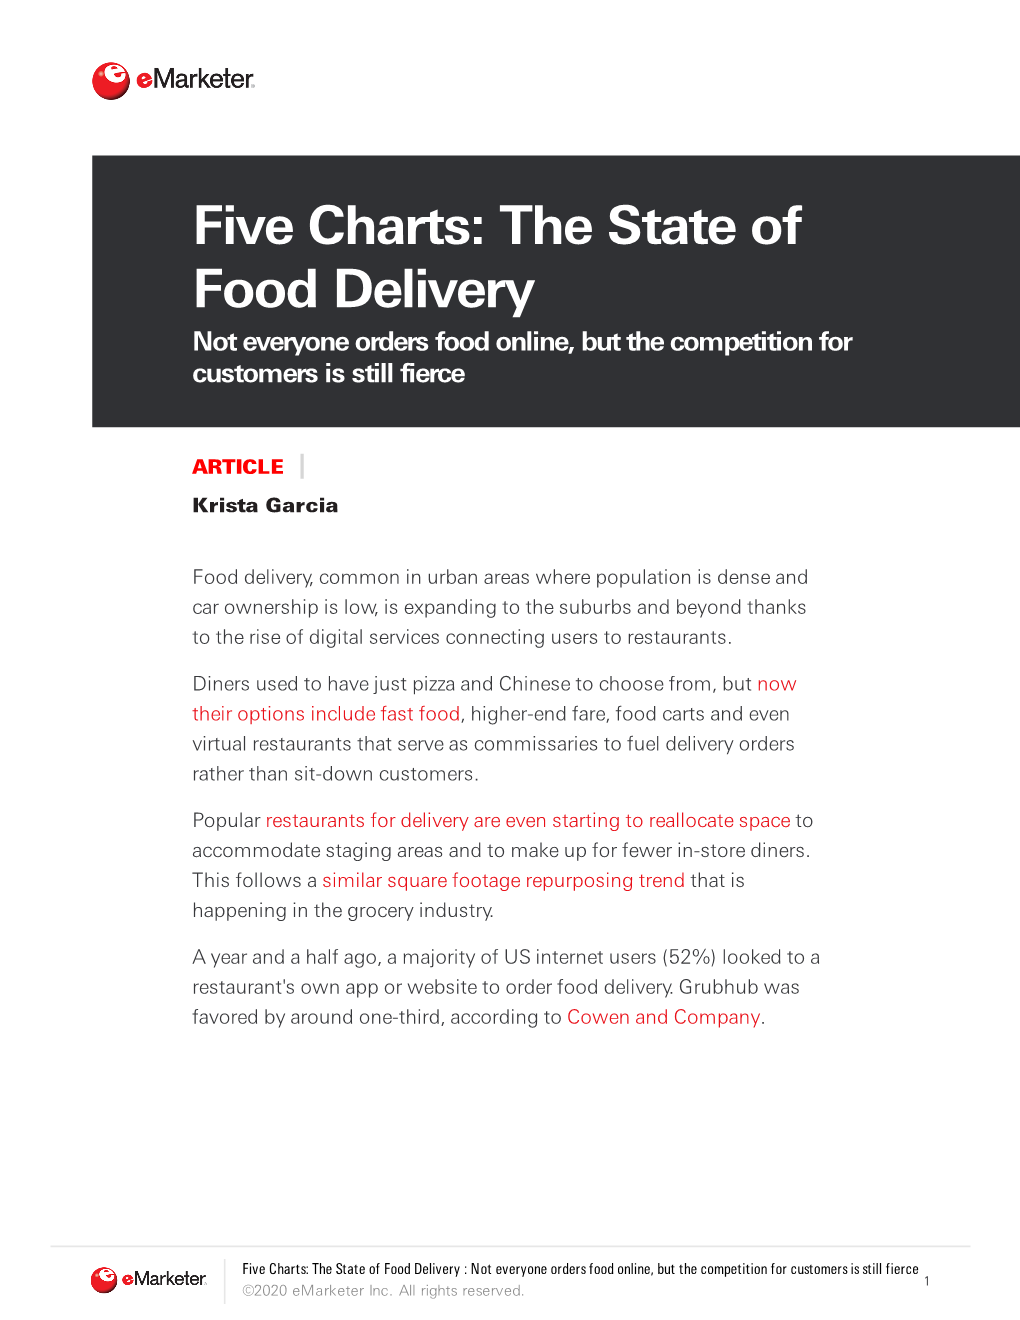 Five Charts: the State of Food Delivery Not Everyone Orders Food Online, but the Competition for Customers Is Still Fierce